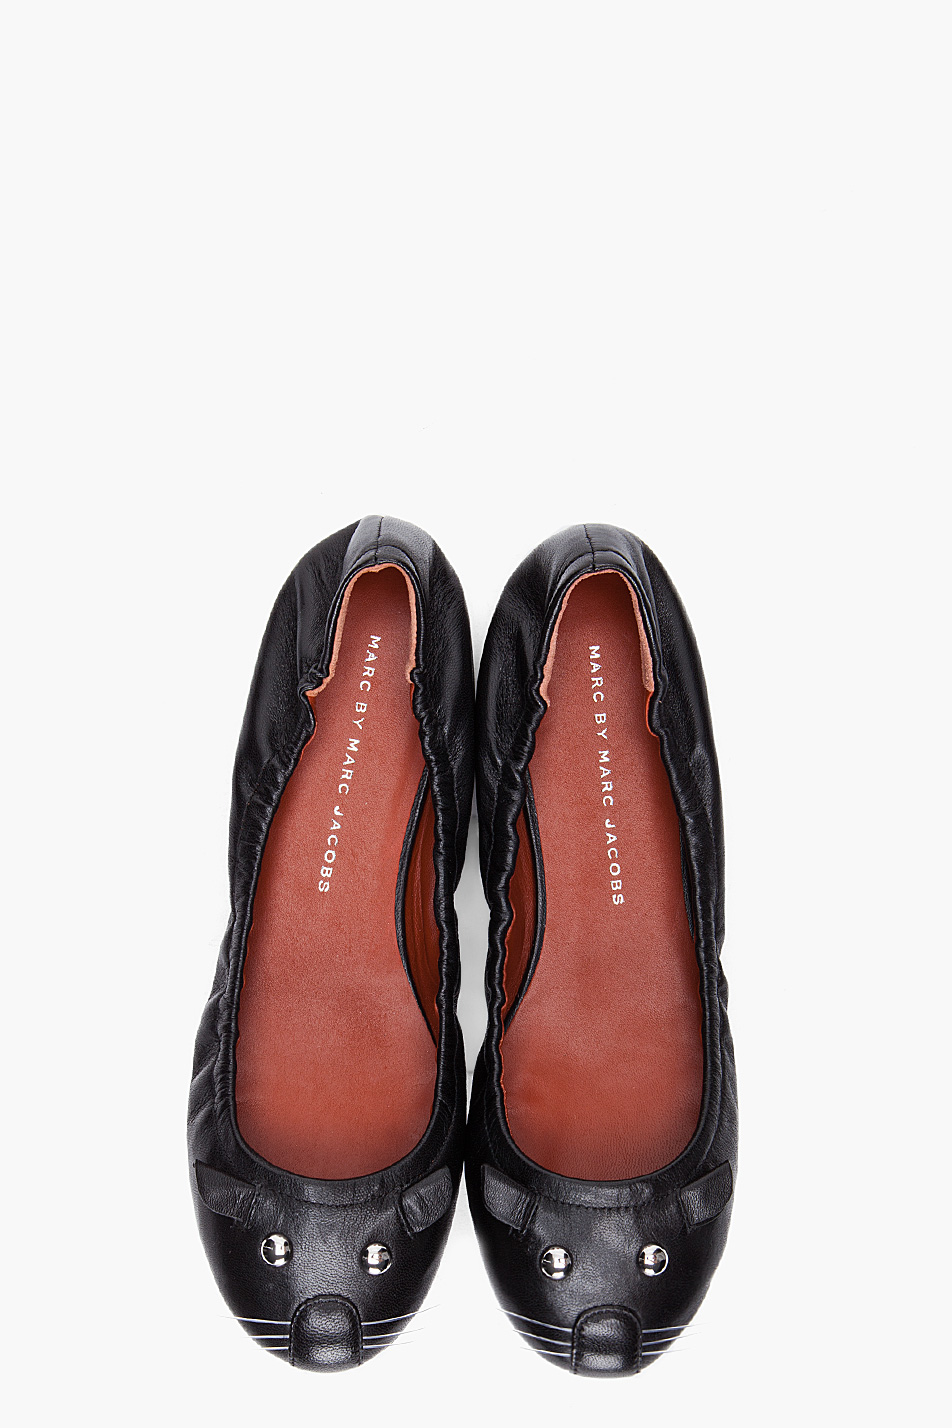 Marc By Marc Jacobs Cat Ballerina | Lyst